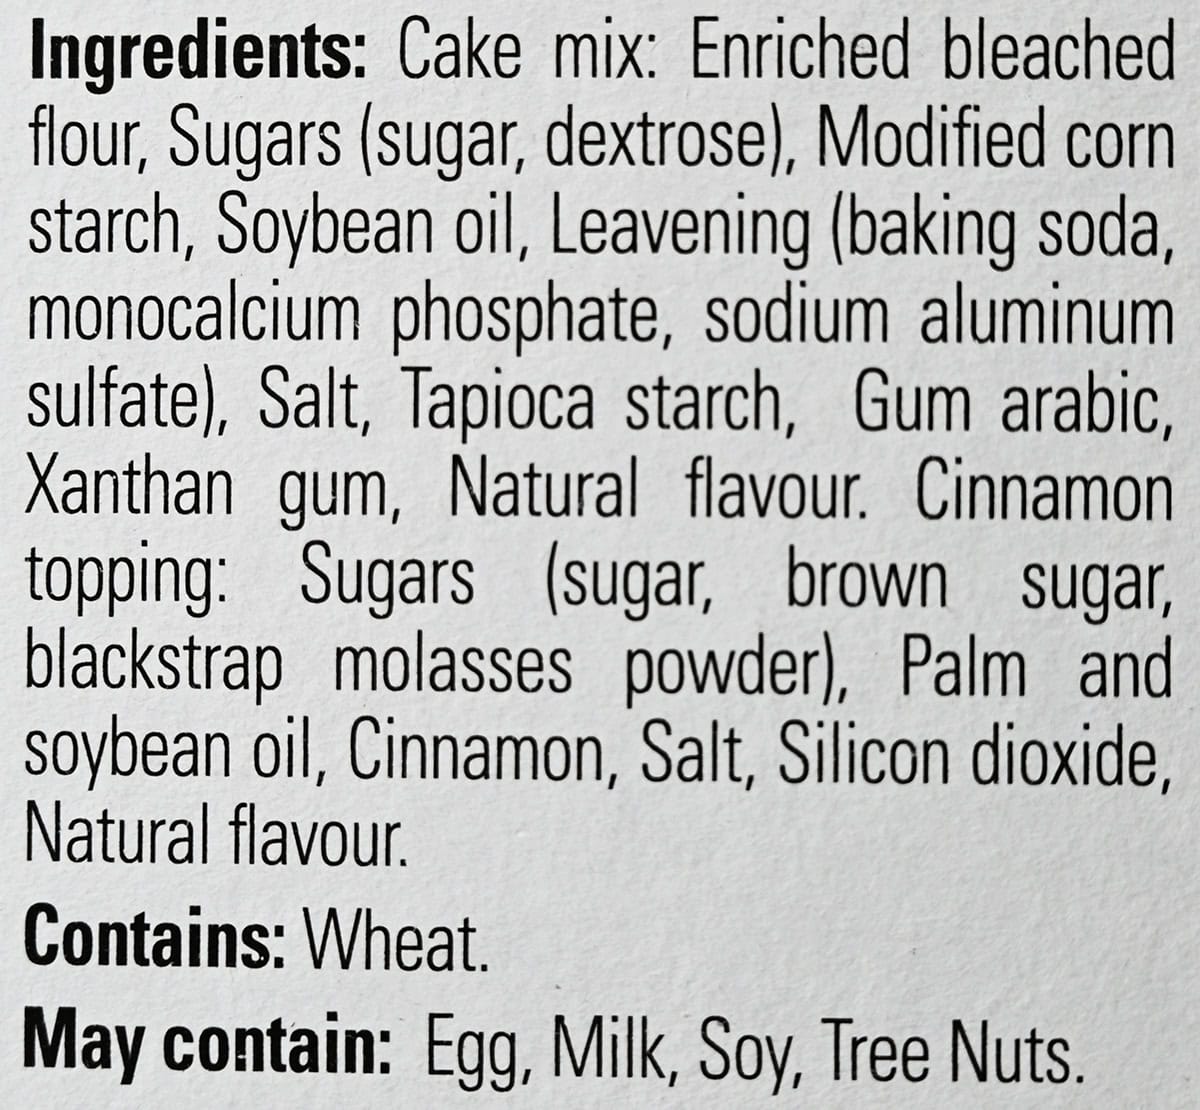 Image of the ingredients for the cake from the back of the box.